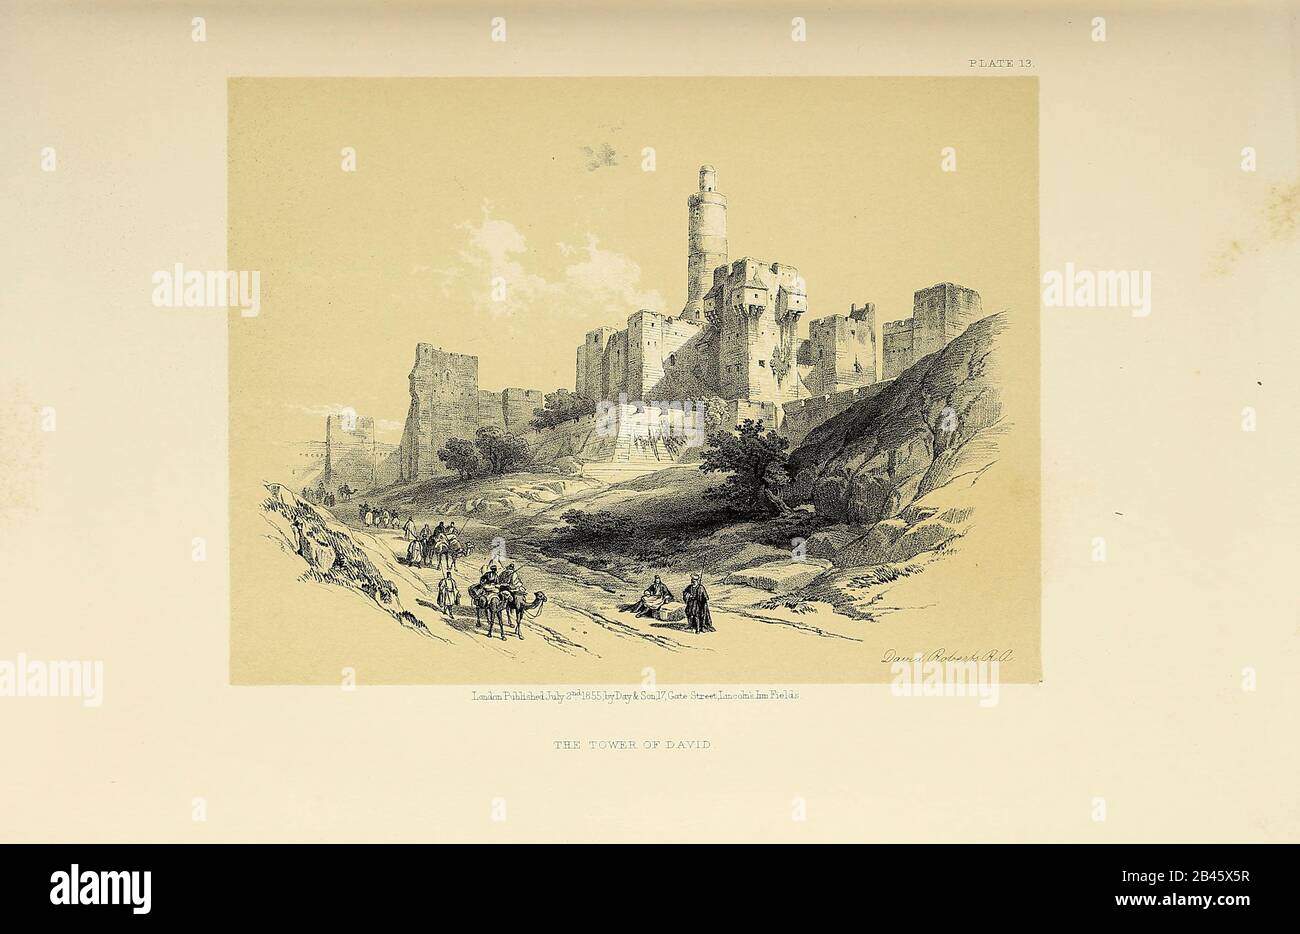 Tower of David from The Holy Land : Syria, Idumea, Arabia, Egypt & Nubia by Roberts, David, (1796-1864) Engraved by Louis Haghe. Volume 1. Book Published in 1855 by D. Appleton & Co., 346 & 348 Broadway in New York. Stock Photo